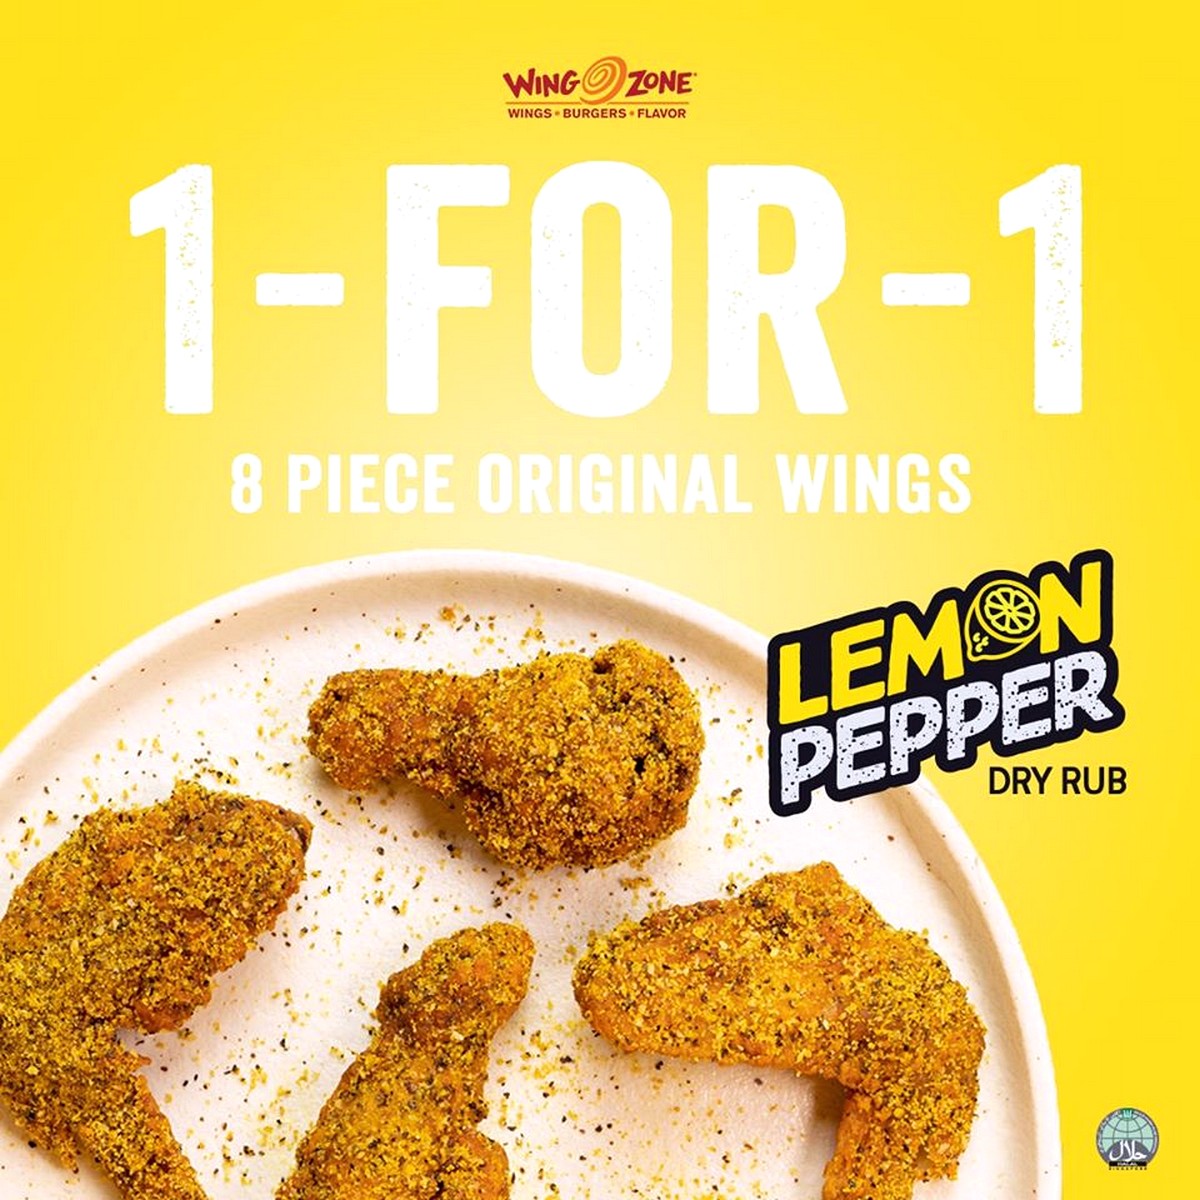 Wing-Zone-New-Lemon-Pepper-Dry-Rub-1-For-1-Promotion-Singapore-2020-Food-Offers Now till 31 July 2020: Wing Zone 1-For-1 Promo for 8 Pcs Original Wings!